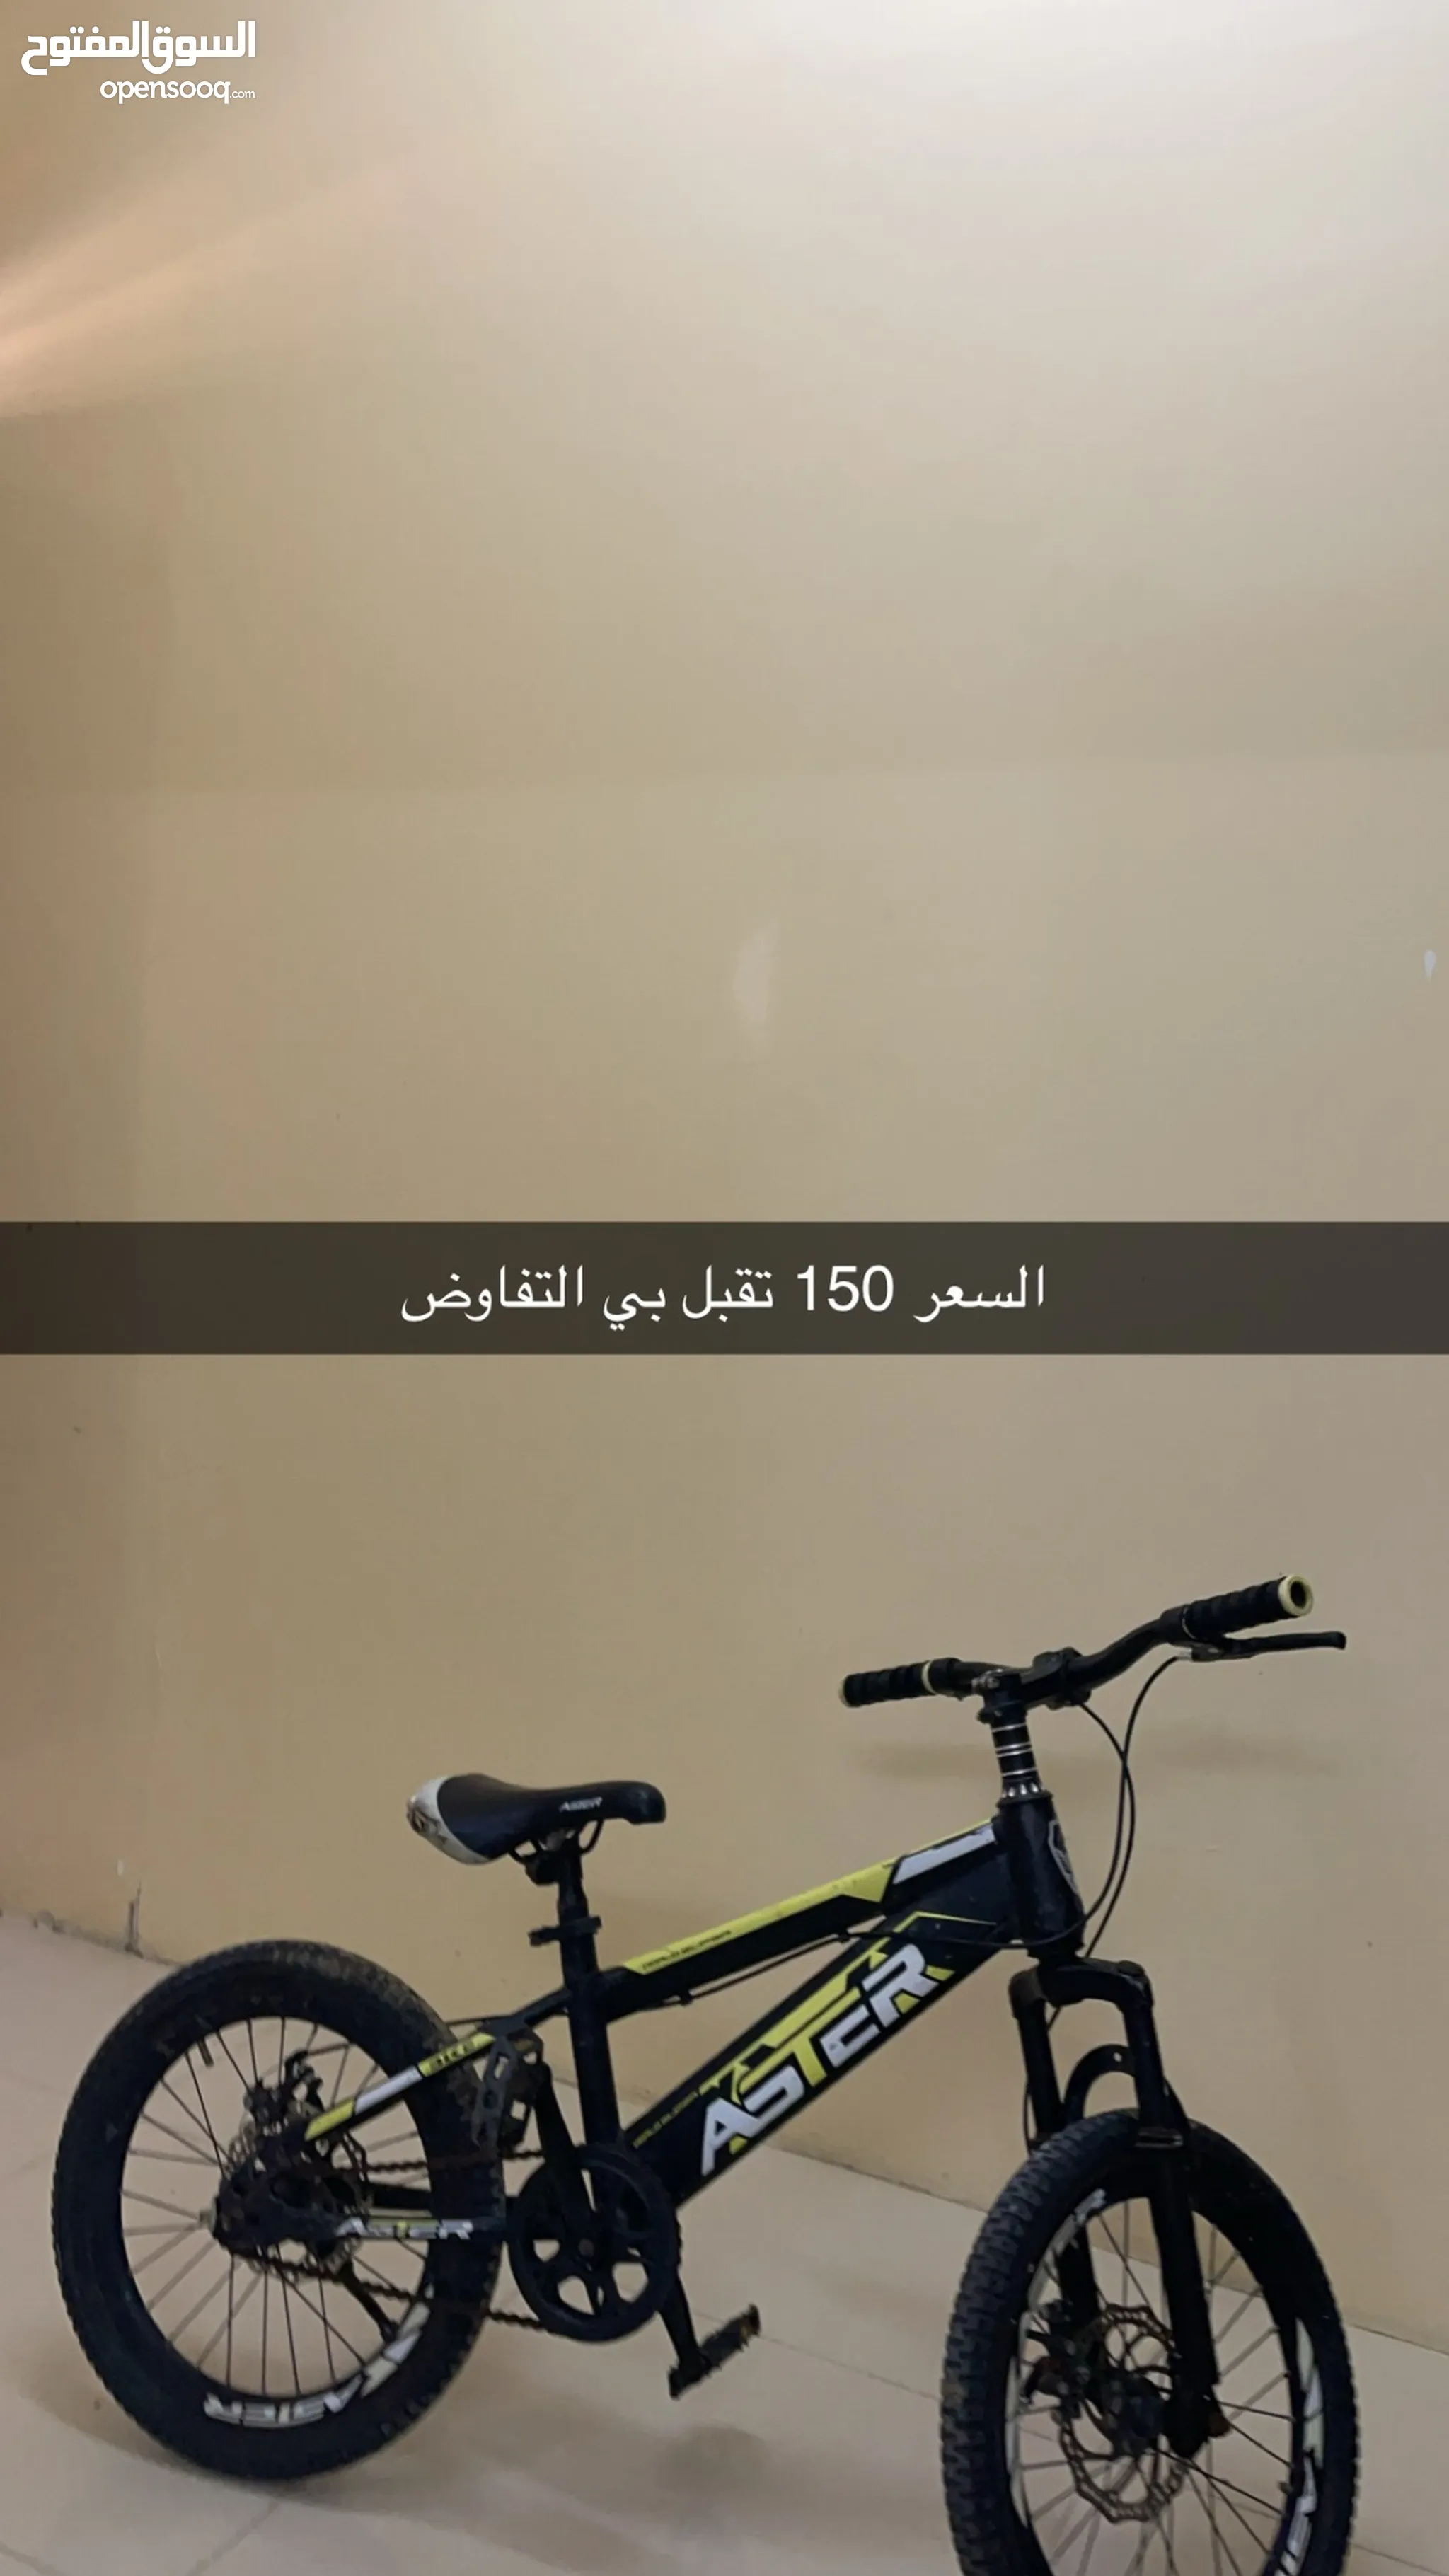 Affordable Bicycles & Accessories for Sale or Rent in UAE - Enjoy Outdoors  with Gear! | OpenSooq